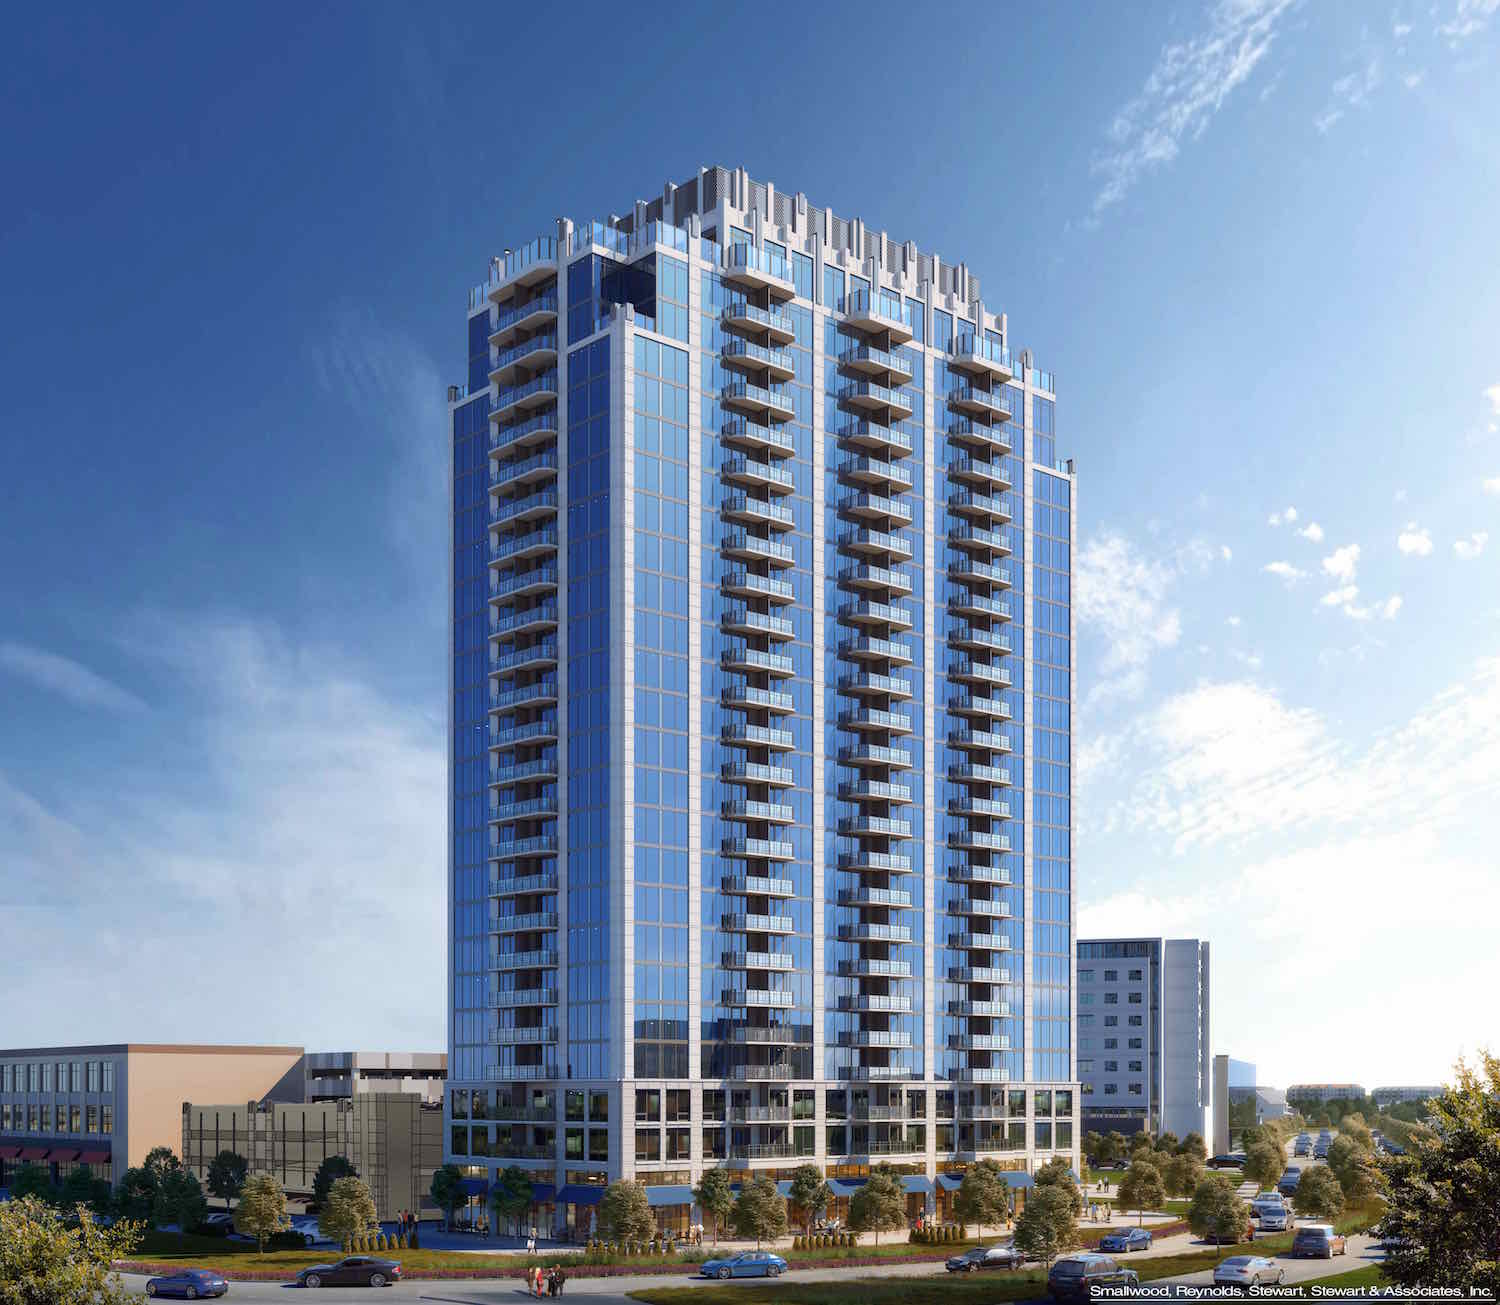 Work begins on Frisco Station's first residential high-rise ...